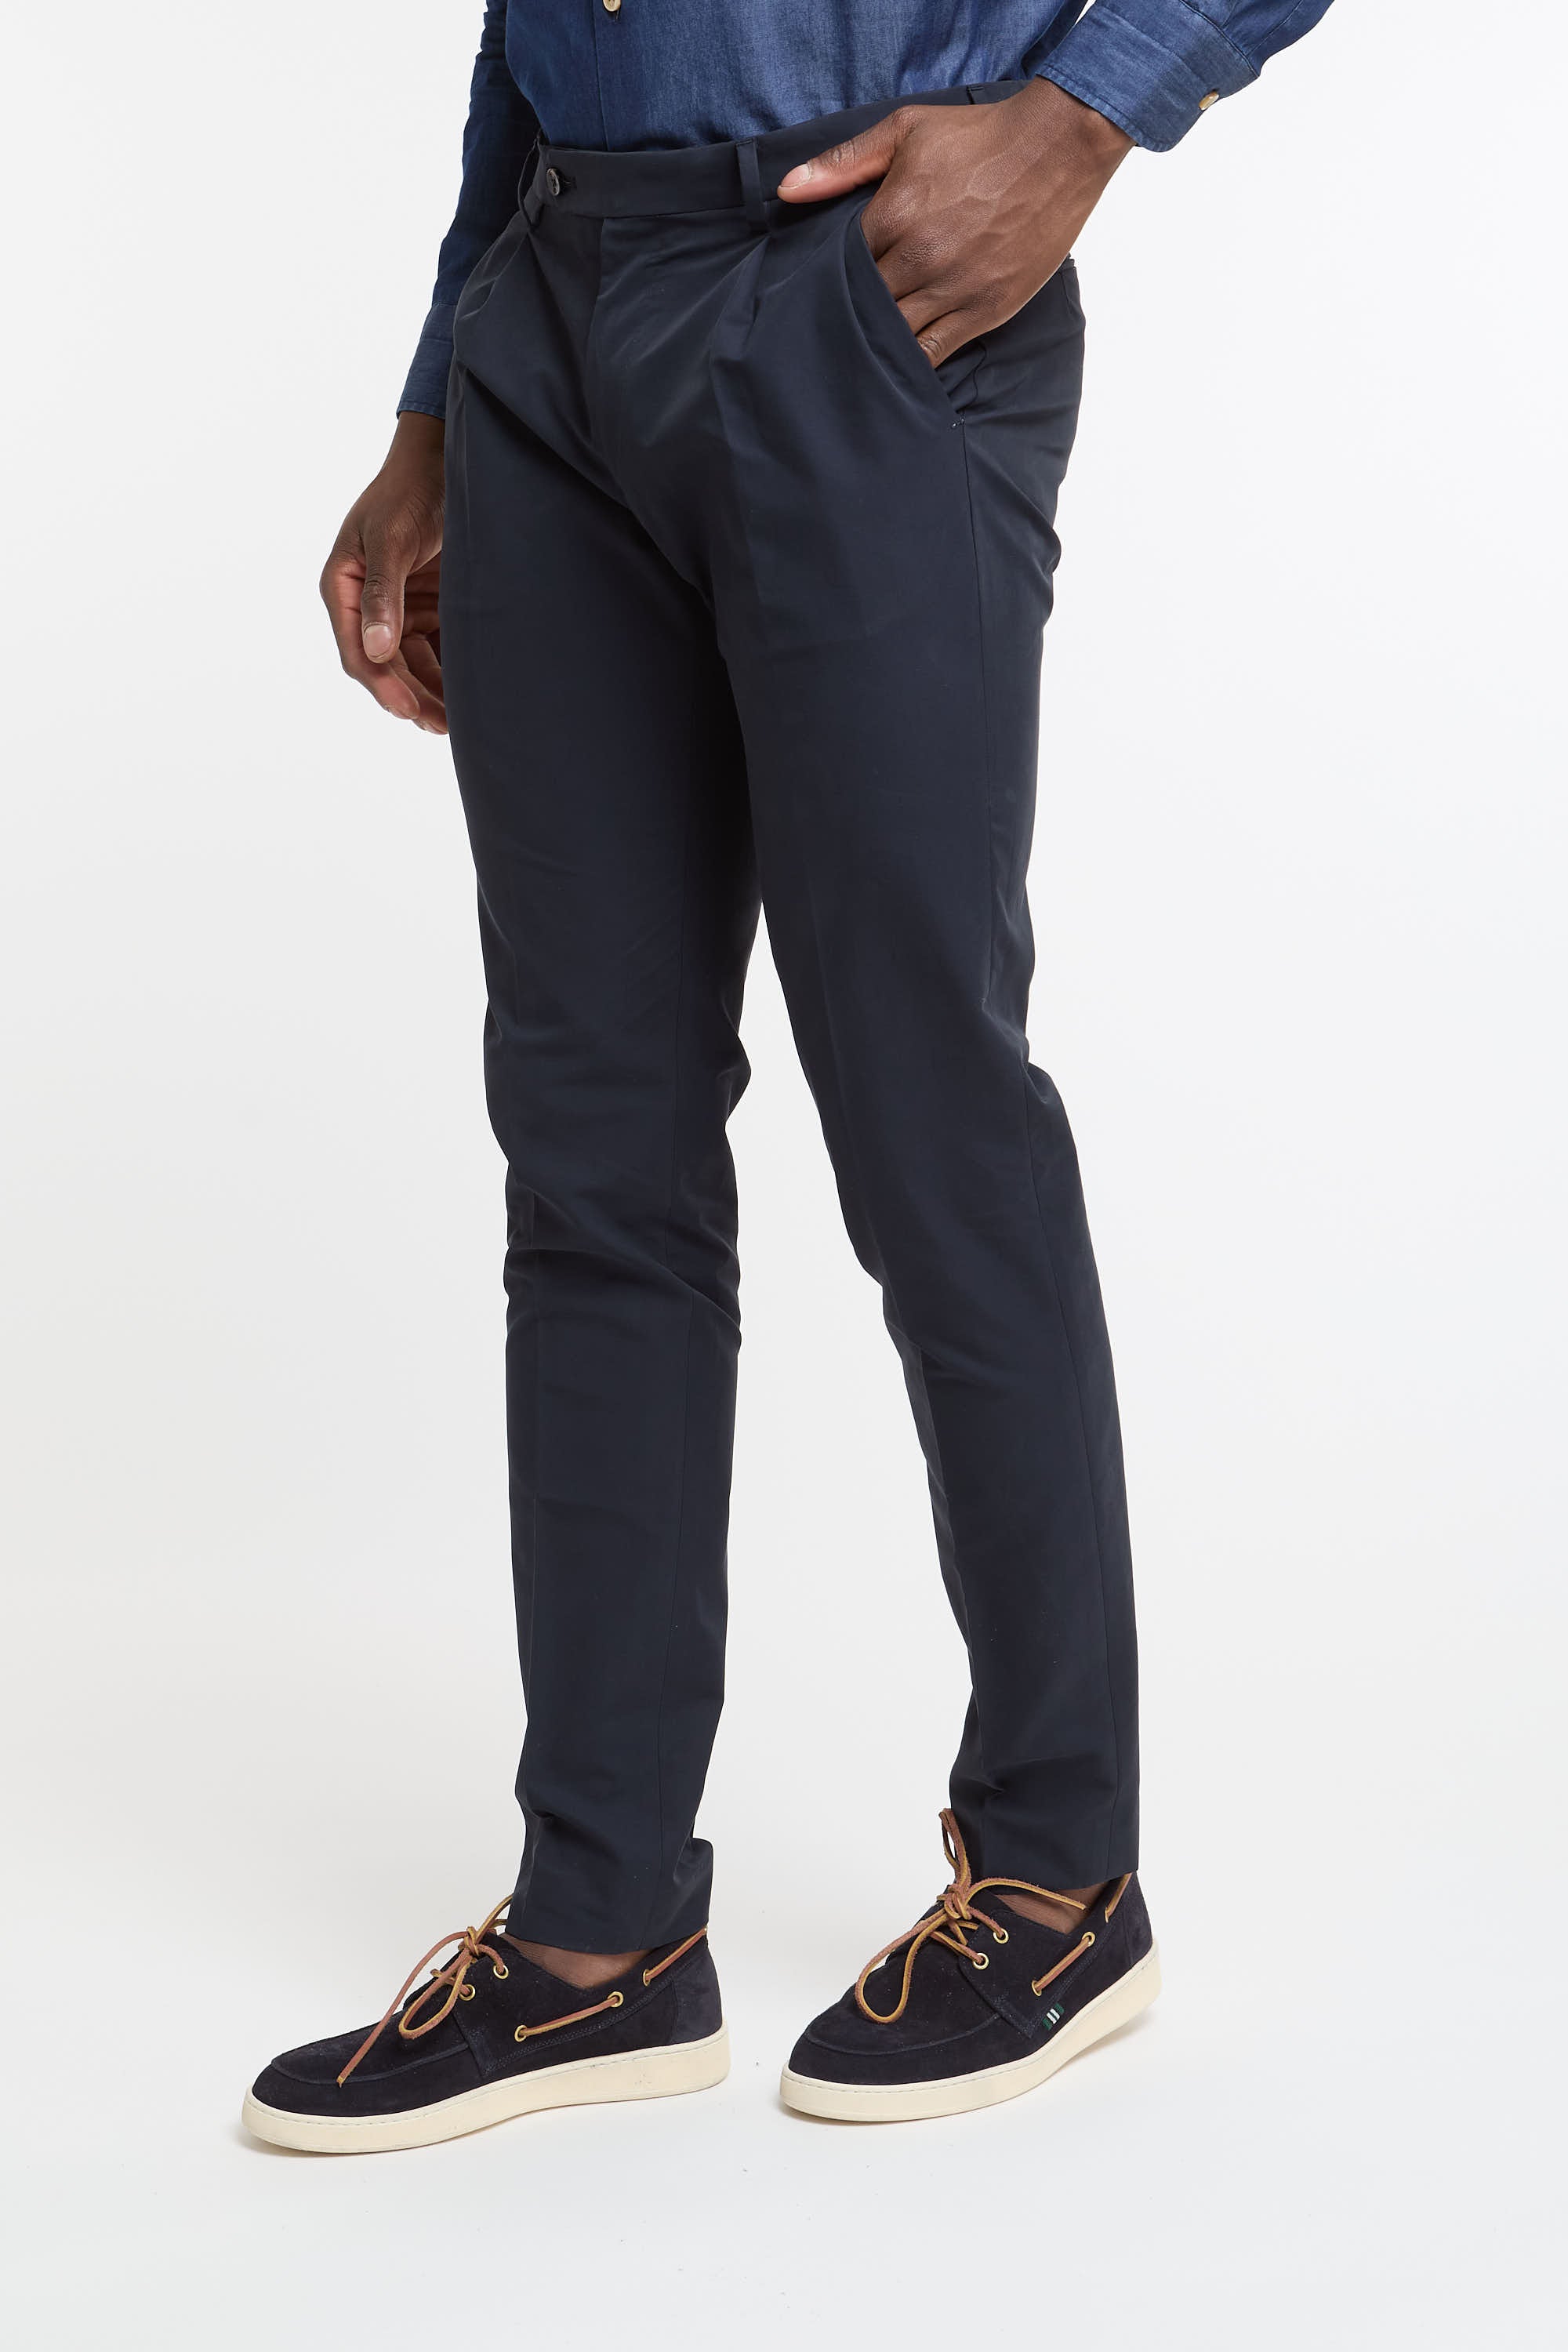 Berwich Pleated Cotton/Polyamide Blue Trousers-5